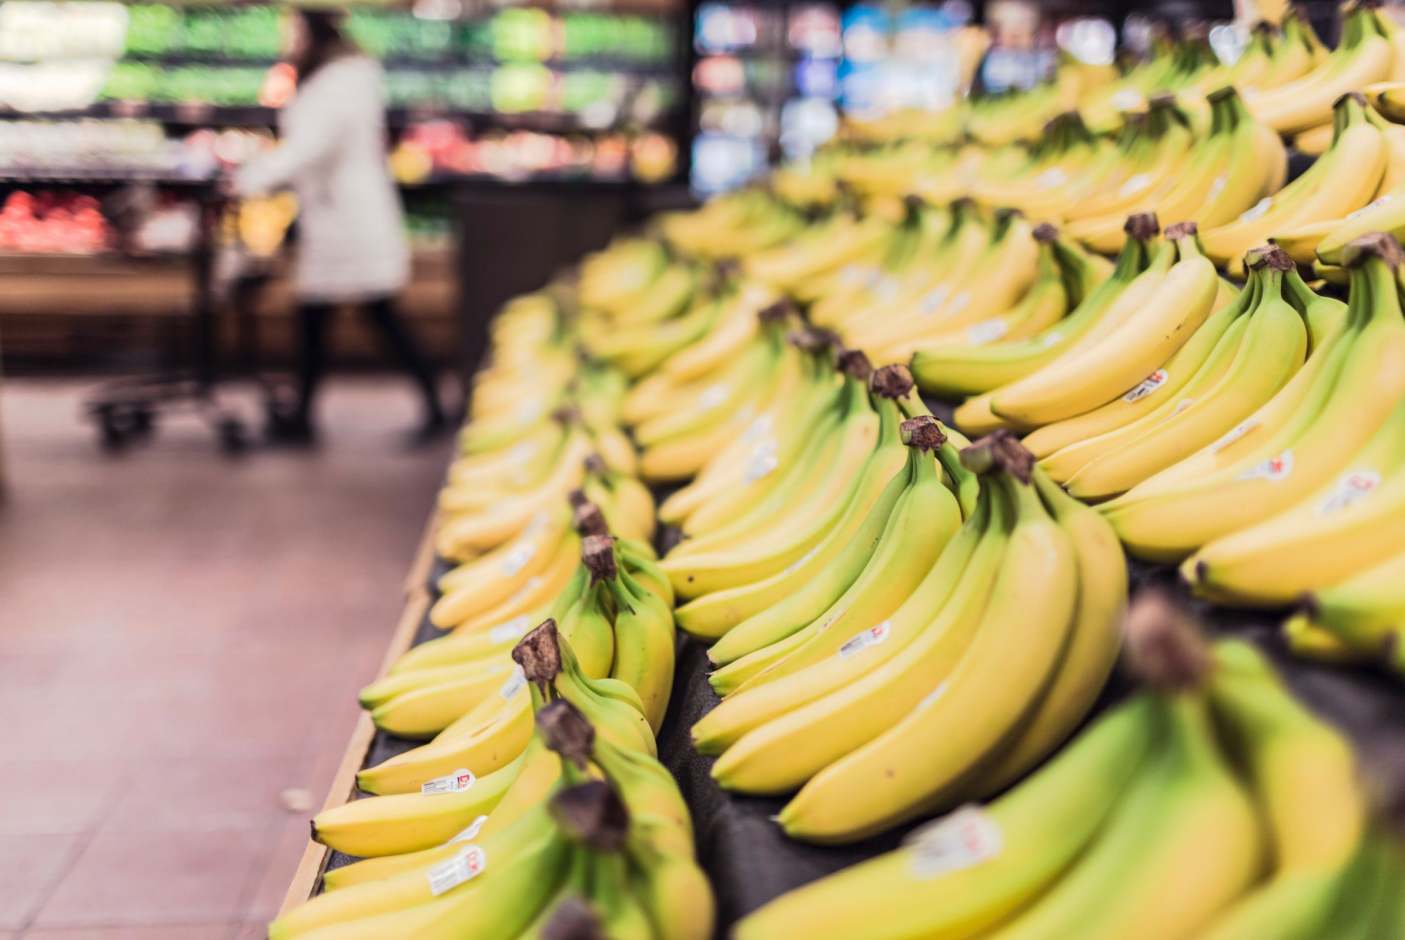 For our export business, we have transitioned from conventional to organic  bananas”